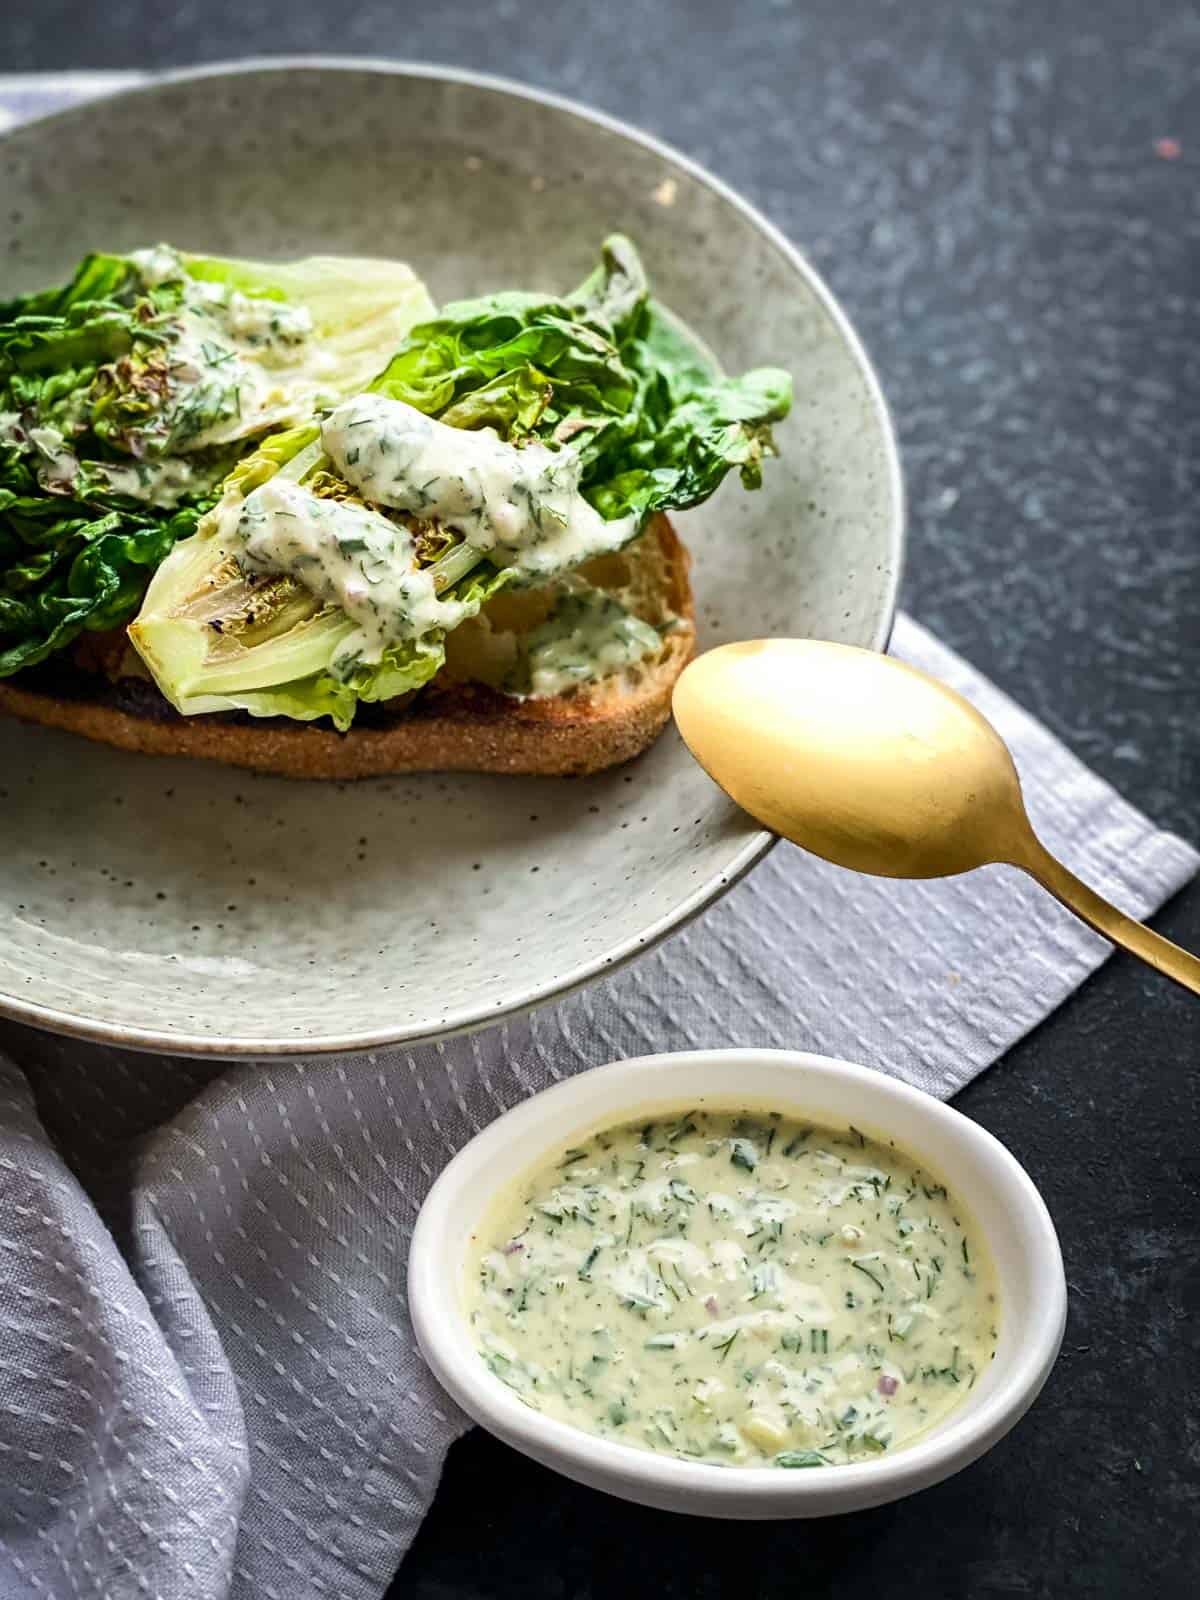 Grilled Little Gem Salad with Tahini Ranch Dressing on toast served in a grey bowl